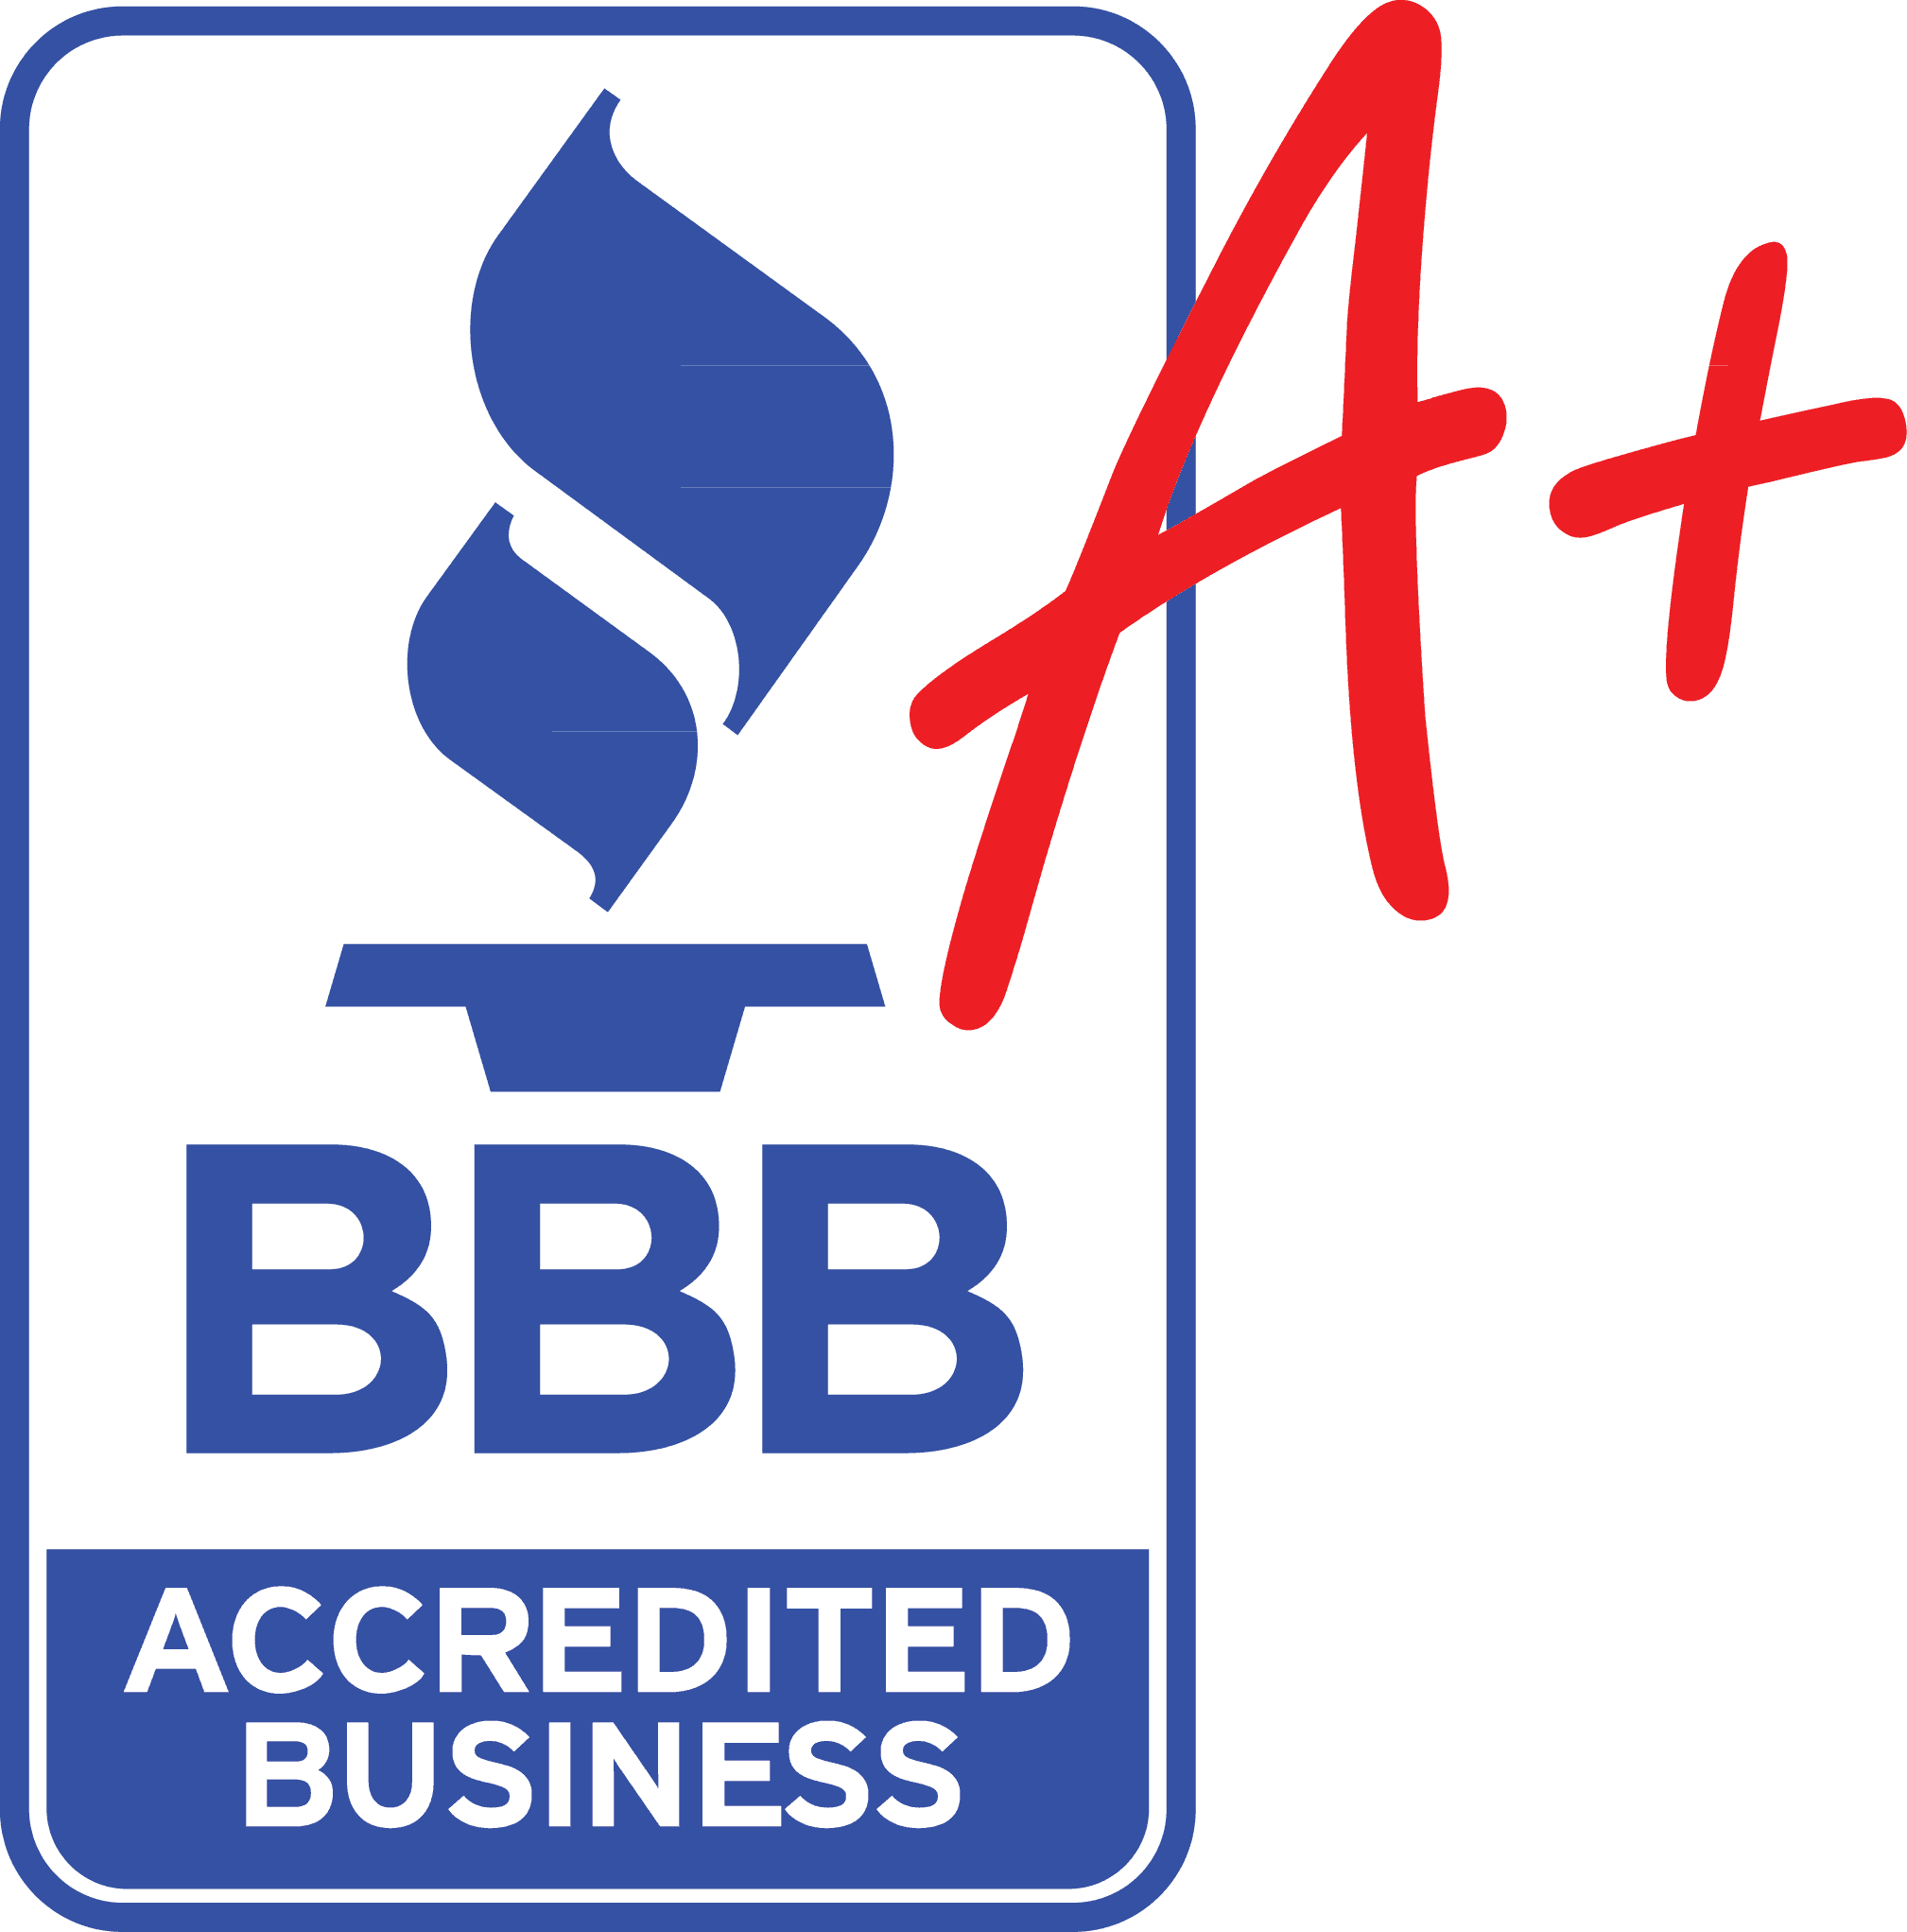 A BBB Rating